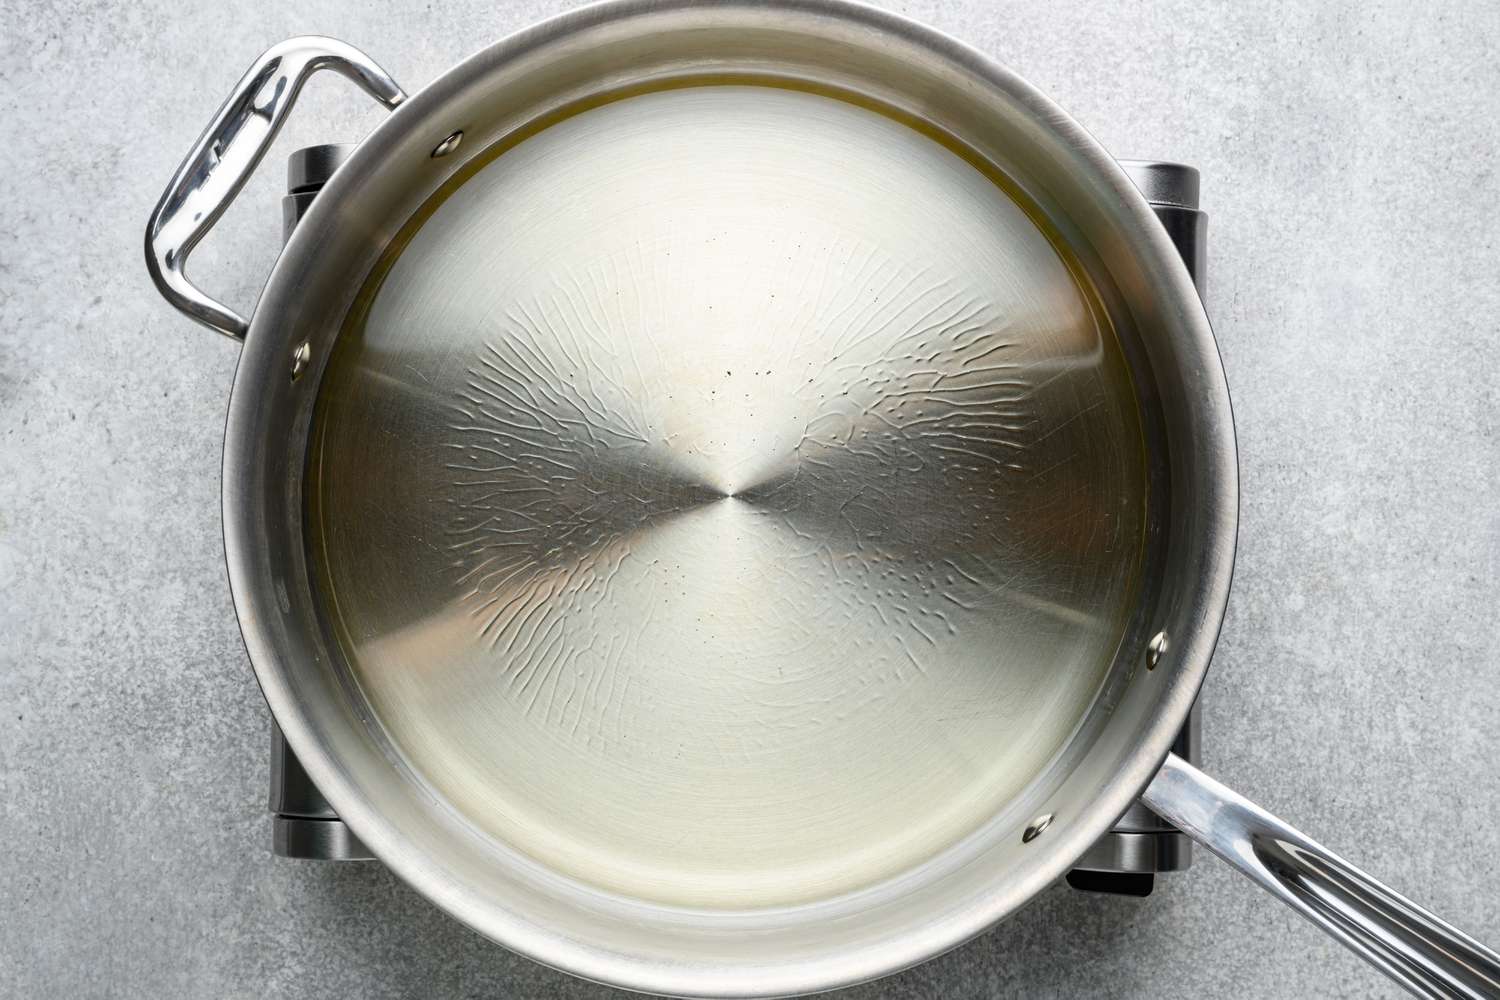 A pan with hot oil